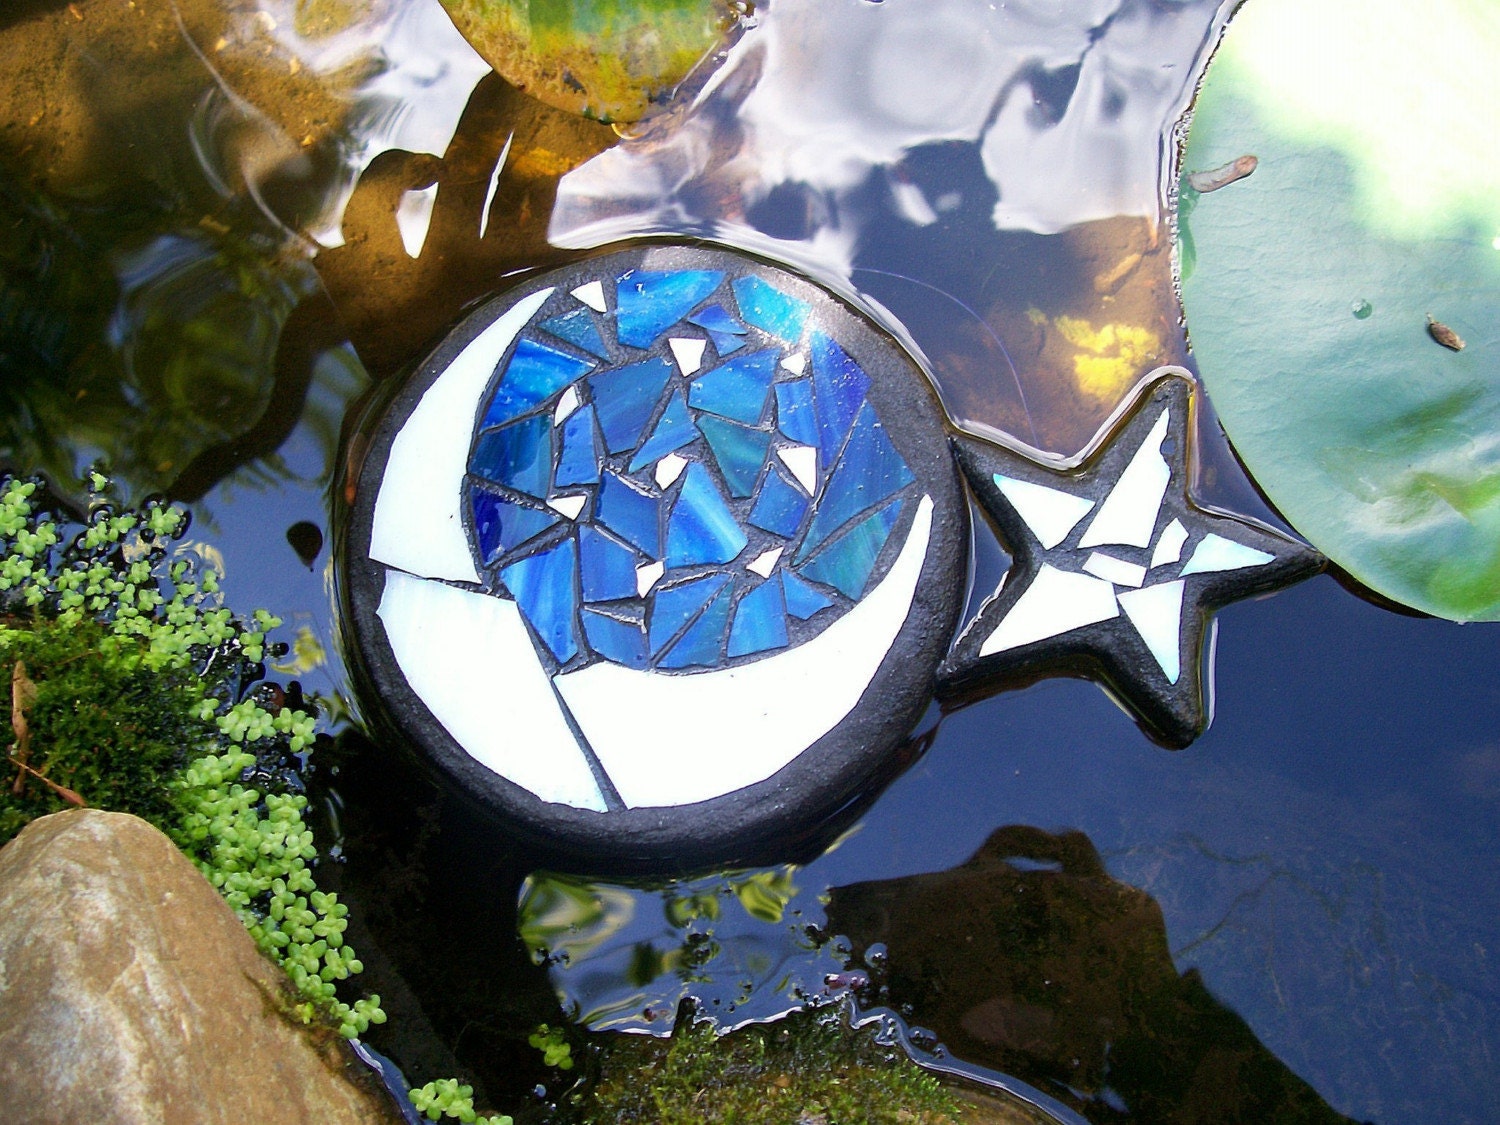 Moon and Star, Floating Glass Art Sculpture, for Water Gardens, Outdoor Rooms, Home Decor